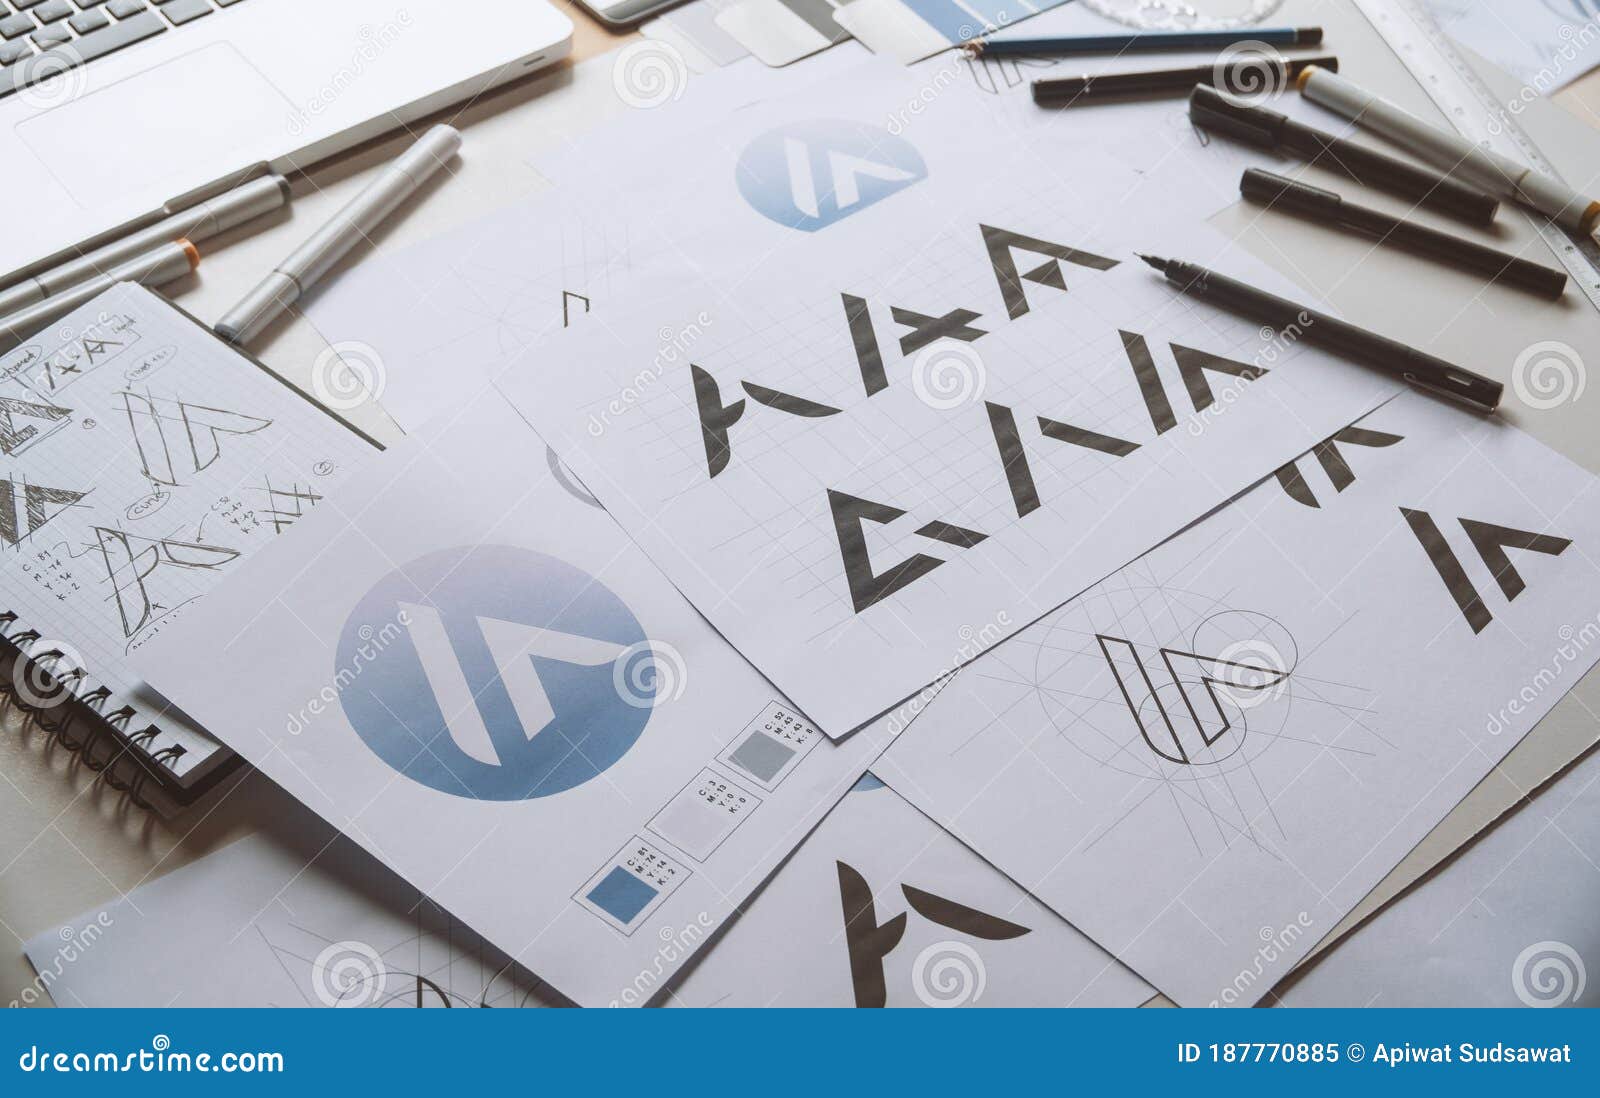 How to sketch a logo a professionals guide to logo sketching  99designs